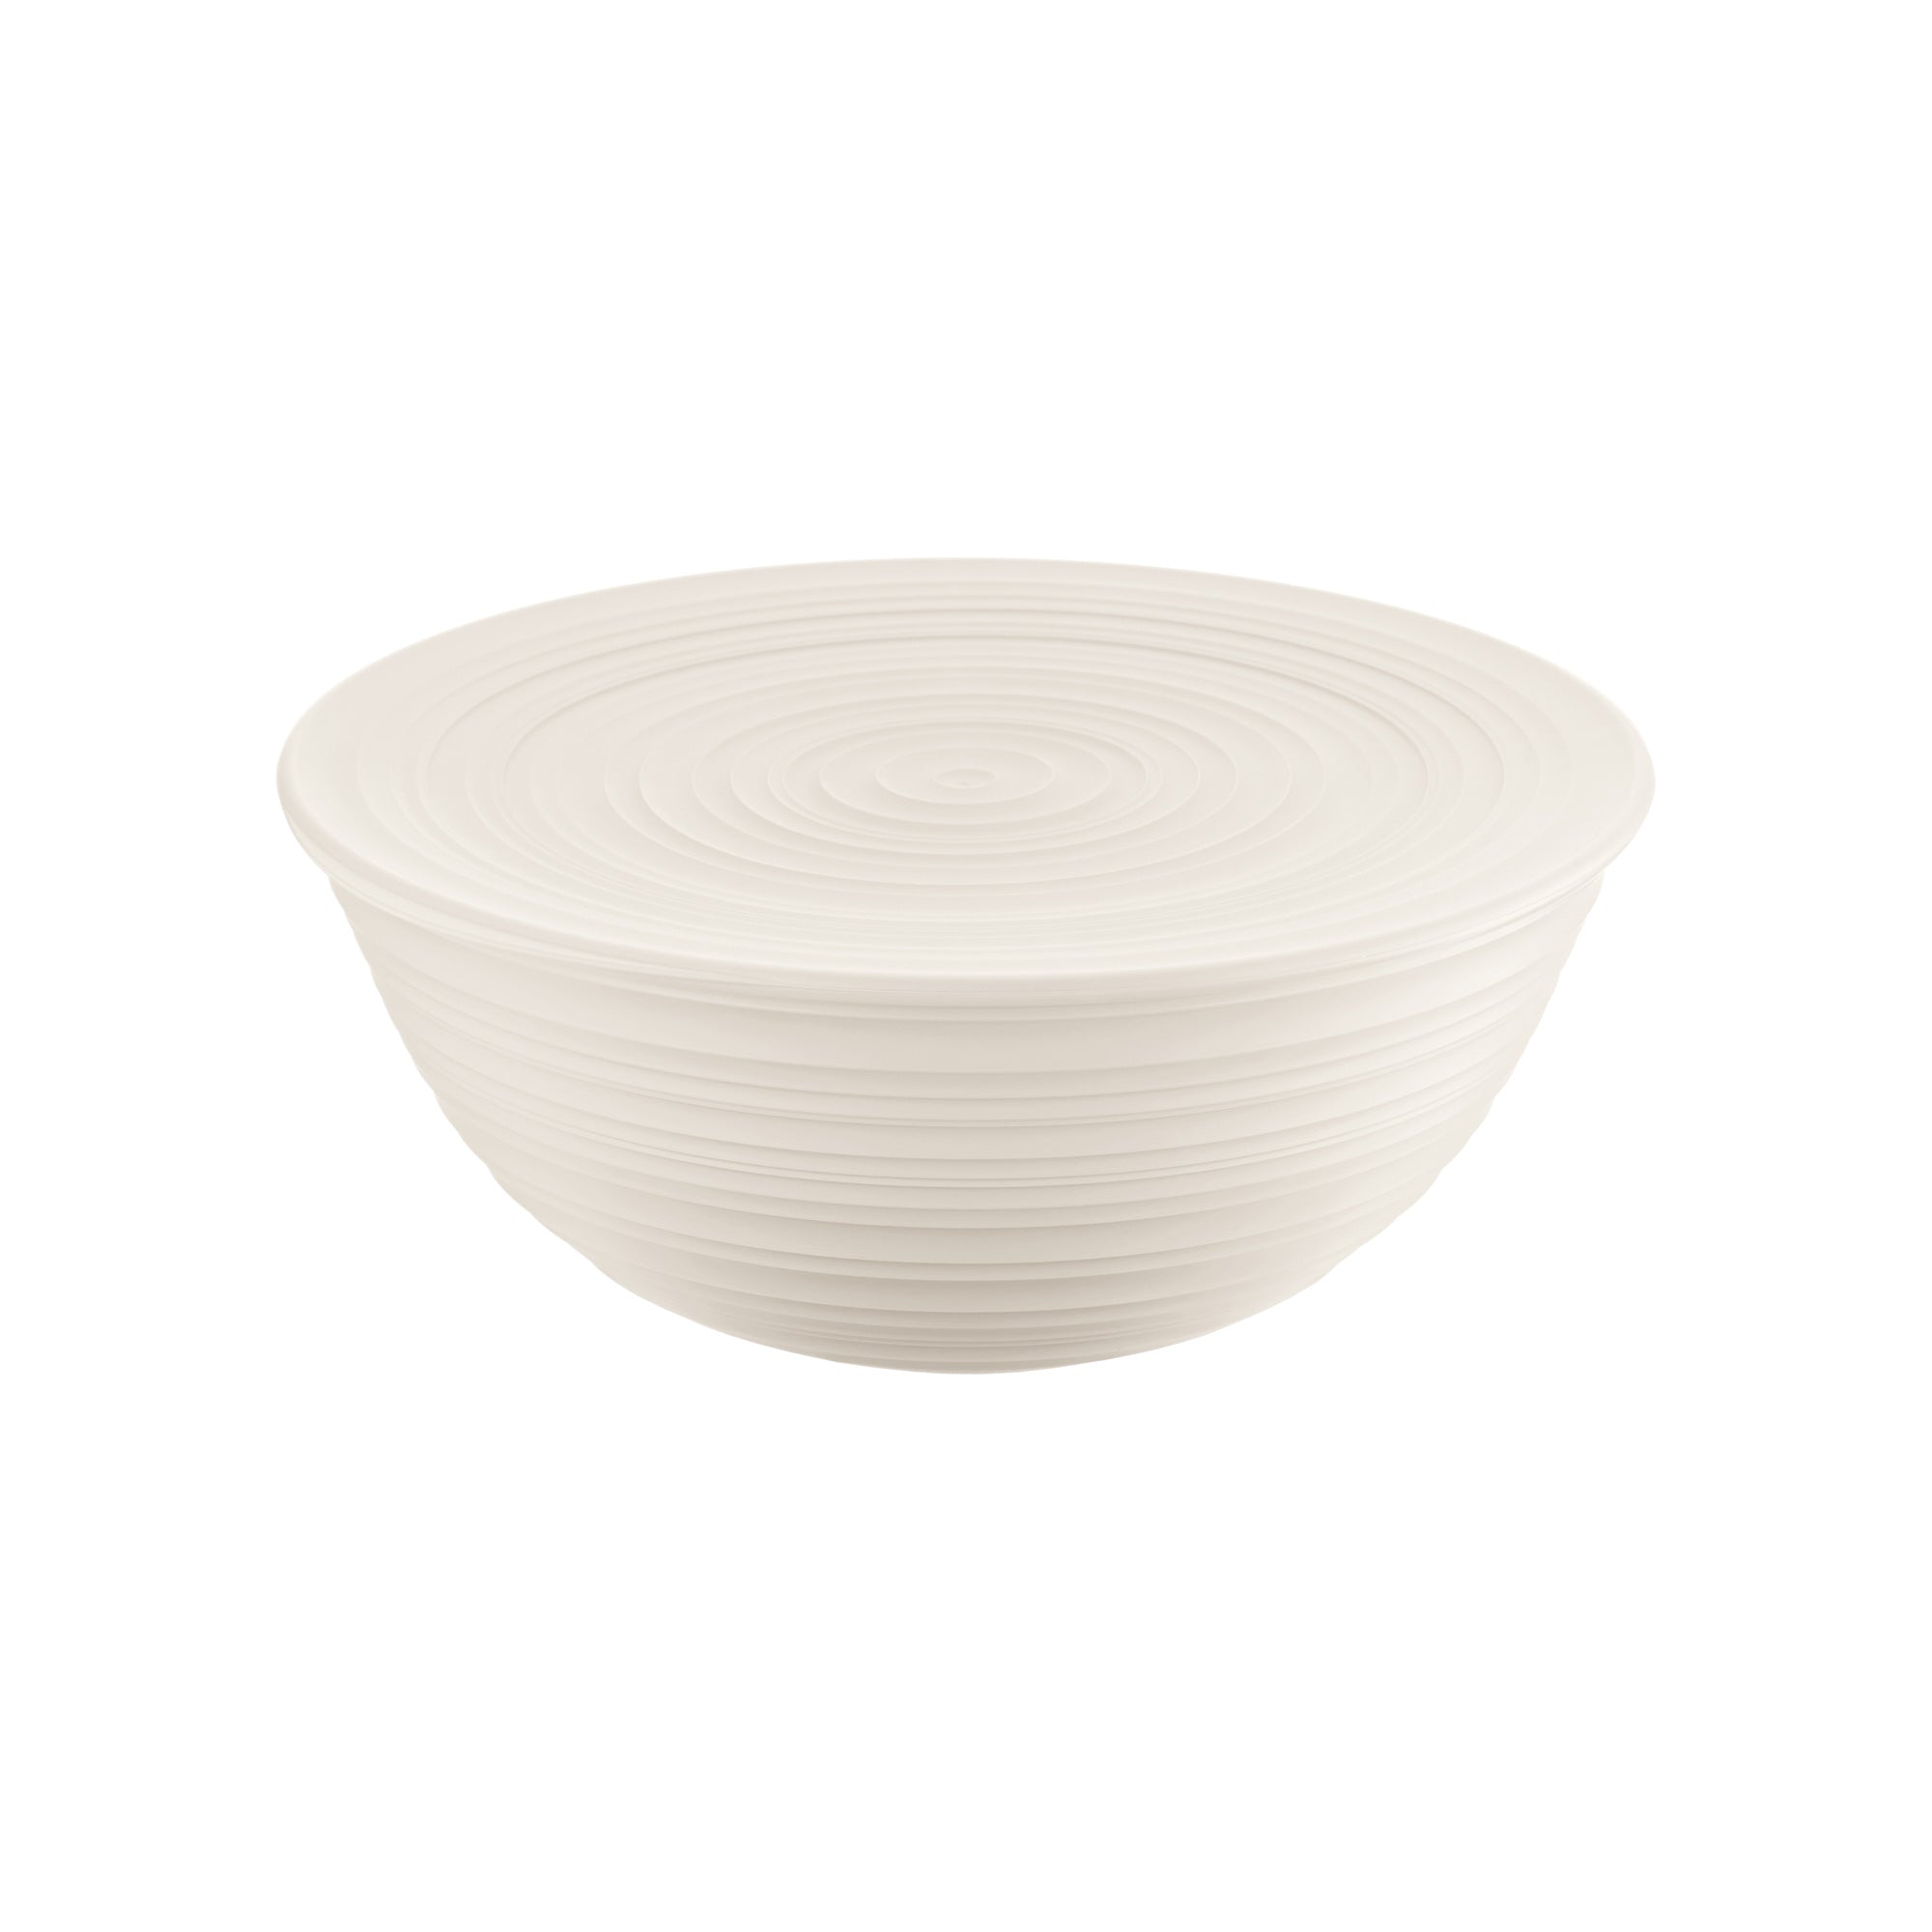 BOWL WITH LID "TIERRA"